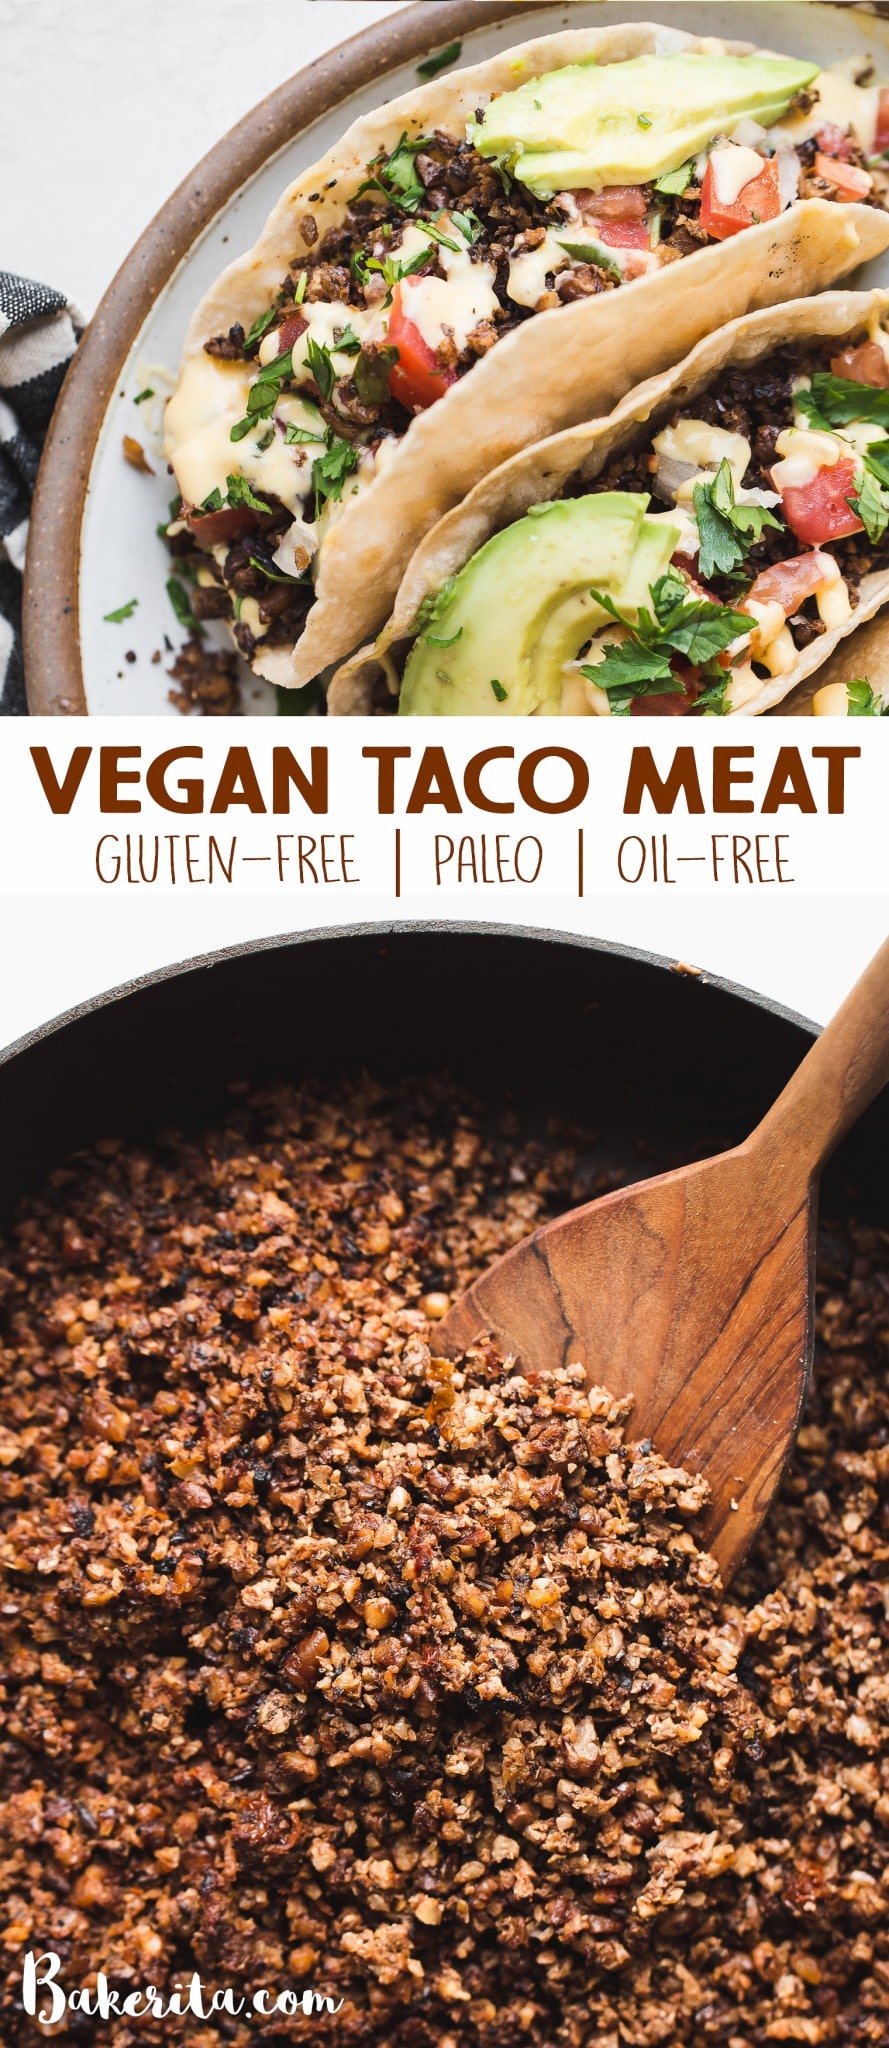 This Vegan Taco Meat recipe is a game-changer! It's made with cauliflower, mushrooms, nuts, and spices. It's perfect as a vegan taco filling, over nachos, on a taco salad, or wrapped in a burrito.